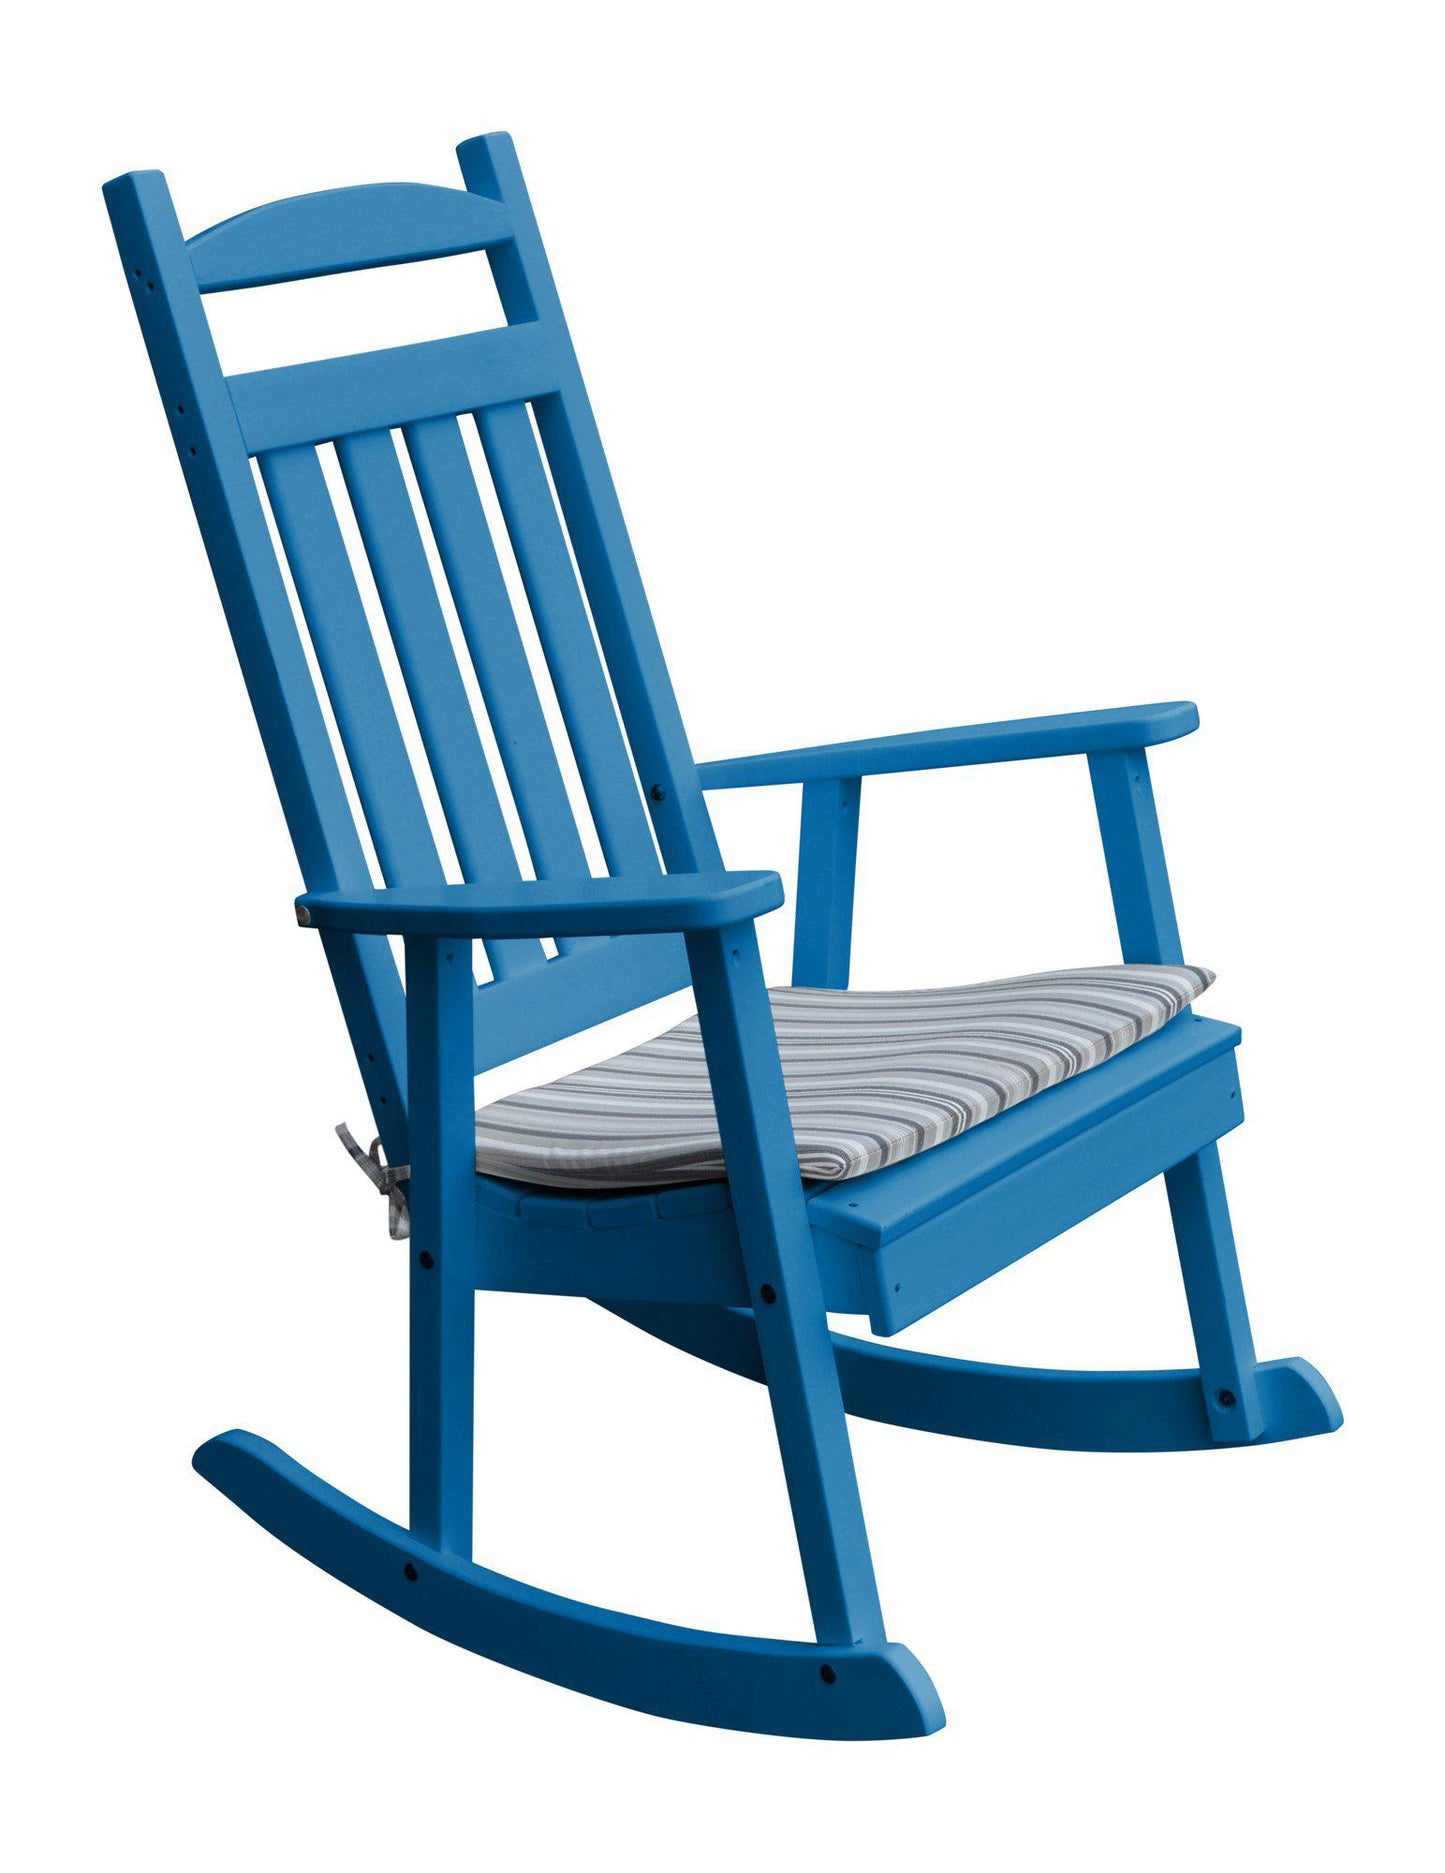 classic recycled plastic porch rocking chair blue with rocker seat cushion